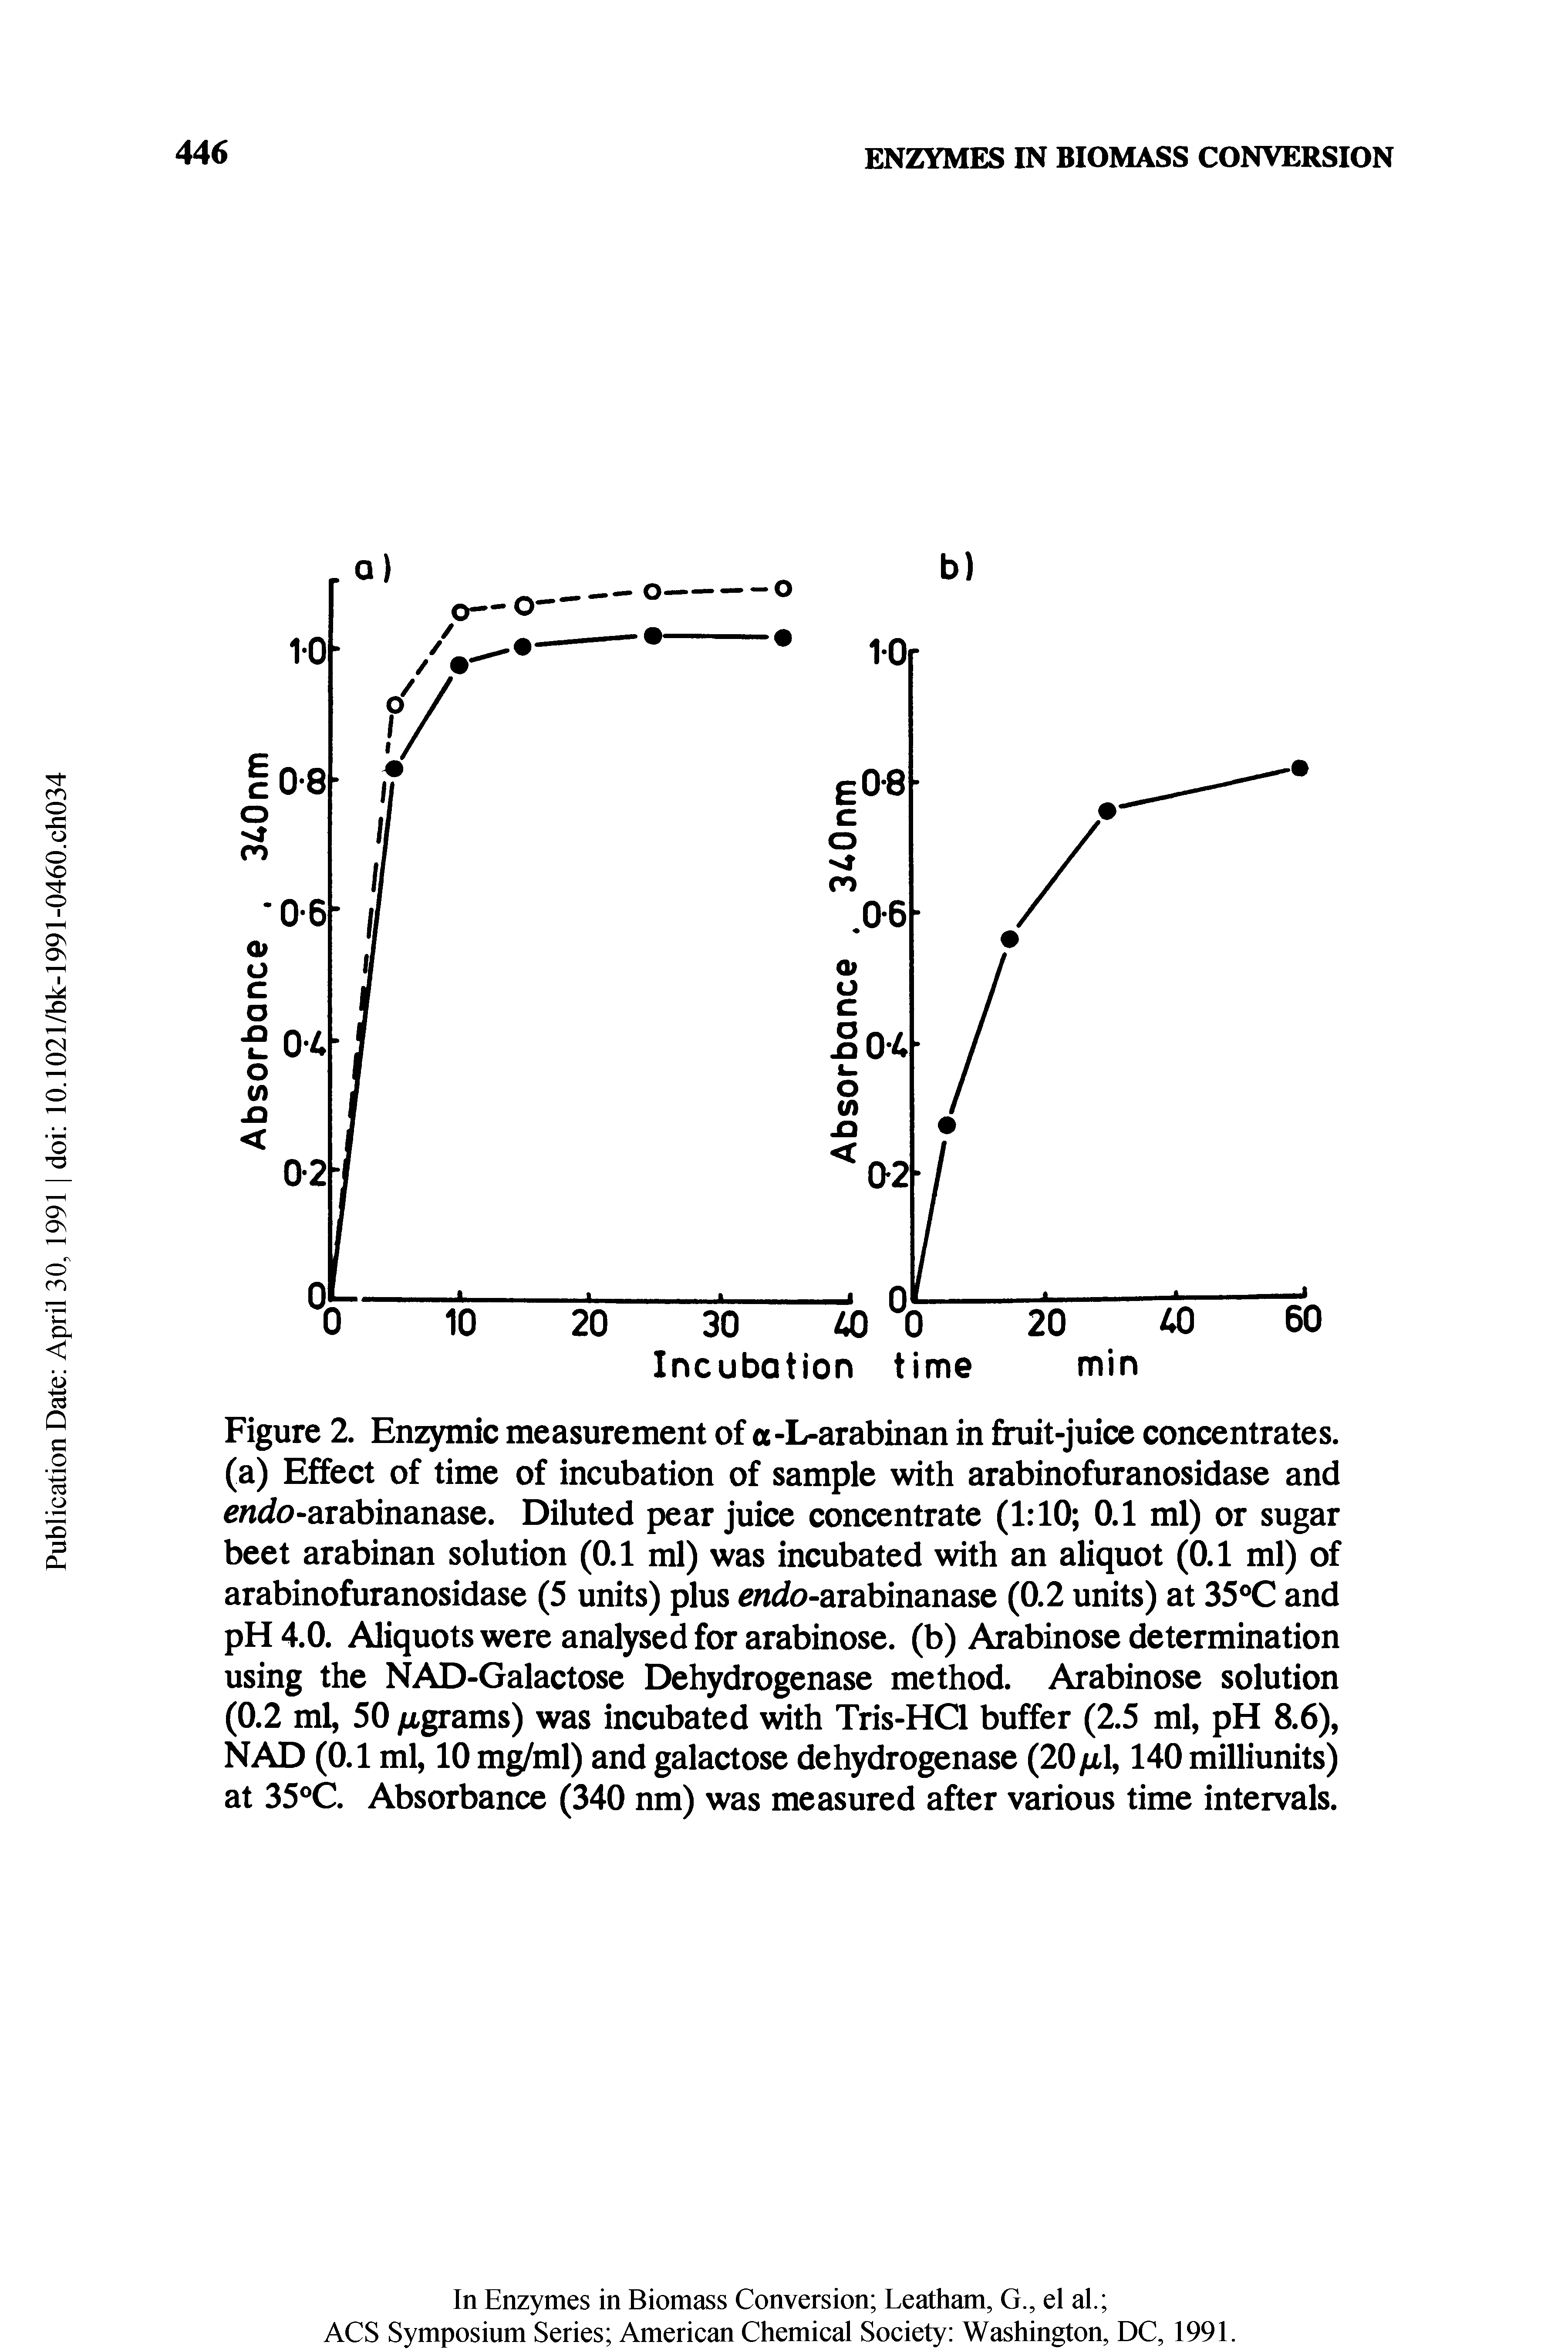 Figure 2. Enzymic measurement of a-L-arabinan in fruit-juice concentrates, (a) Effect of time of incubation of sample with arabinofuranosidase and ndo-arabinanase. Diluted pear juice concentrate (1 10 0.1 ml) or sugar beet arabinan solution (0.1 ml) was incubated with an aliquot (0.1 ml) of arabinofuranosidase (5 units) plus ndo-arabinanase (0.2 units) at 35 C and pH 4.0. Aliquots were analysed for arabinose. (b) Arabinose determination using the NAD-Galactose Dehydrogenase method. Arabinose solution (0.2 ml, 50 digrams) was incubated with Tris-HCl buffer (2.5 ml, pH 8.6), NAD (0.1 ml, 10 m ml) and galactose dehydrogenase (20/i, 140 milliunits) at 35°C. Absorbance (340 nm) was measured after various time intervals.